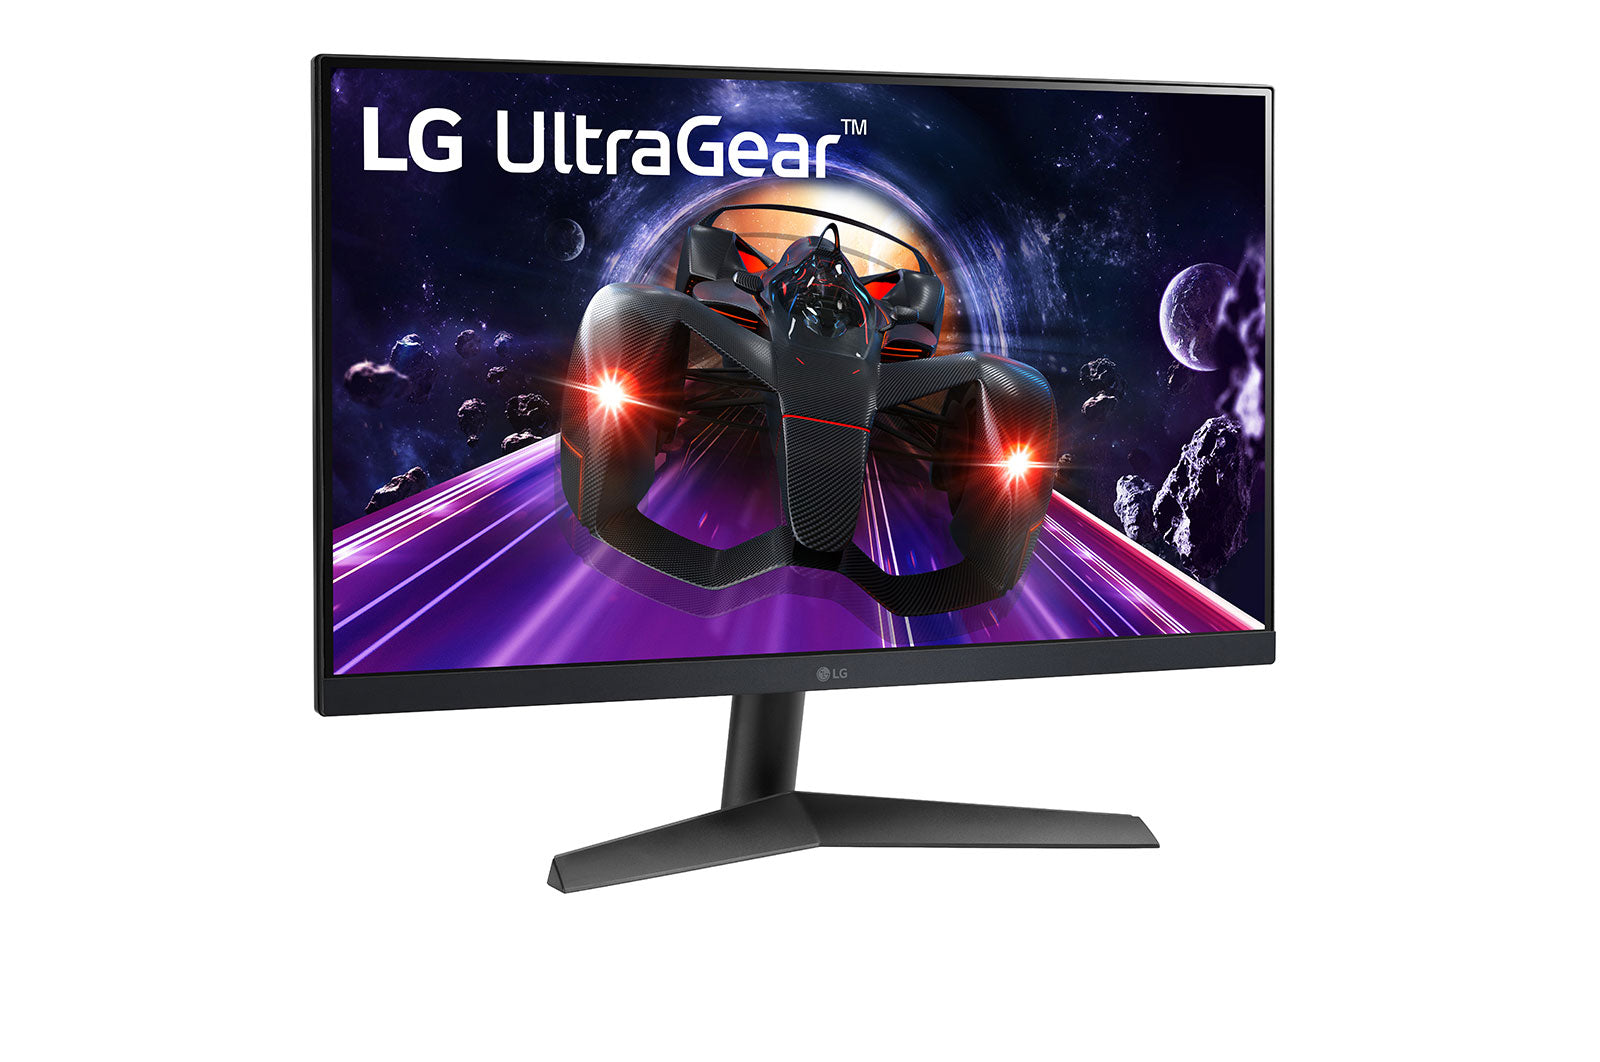 LG 24GN60R  UltraGear FHD IPS 1ms 144Hz HDR Monitor with FreeSync, Dynamic Action Sync, HDR Effect, Motion Blur Reduction Technology, Color Calibrated